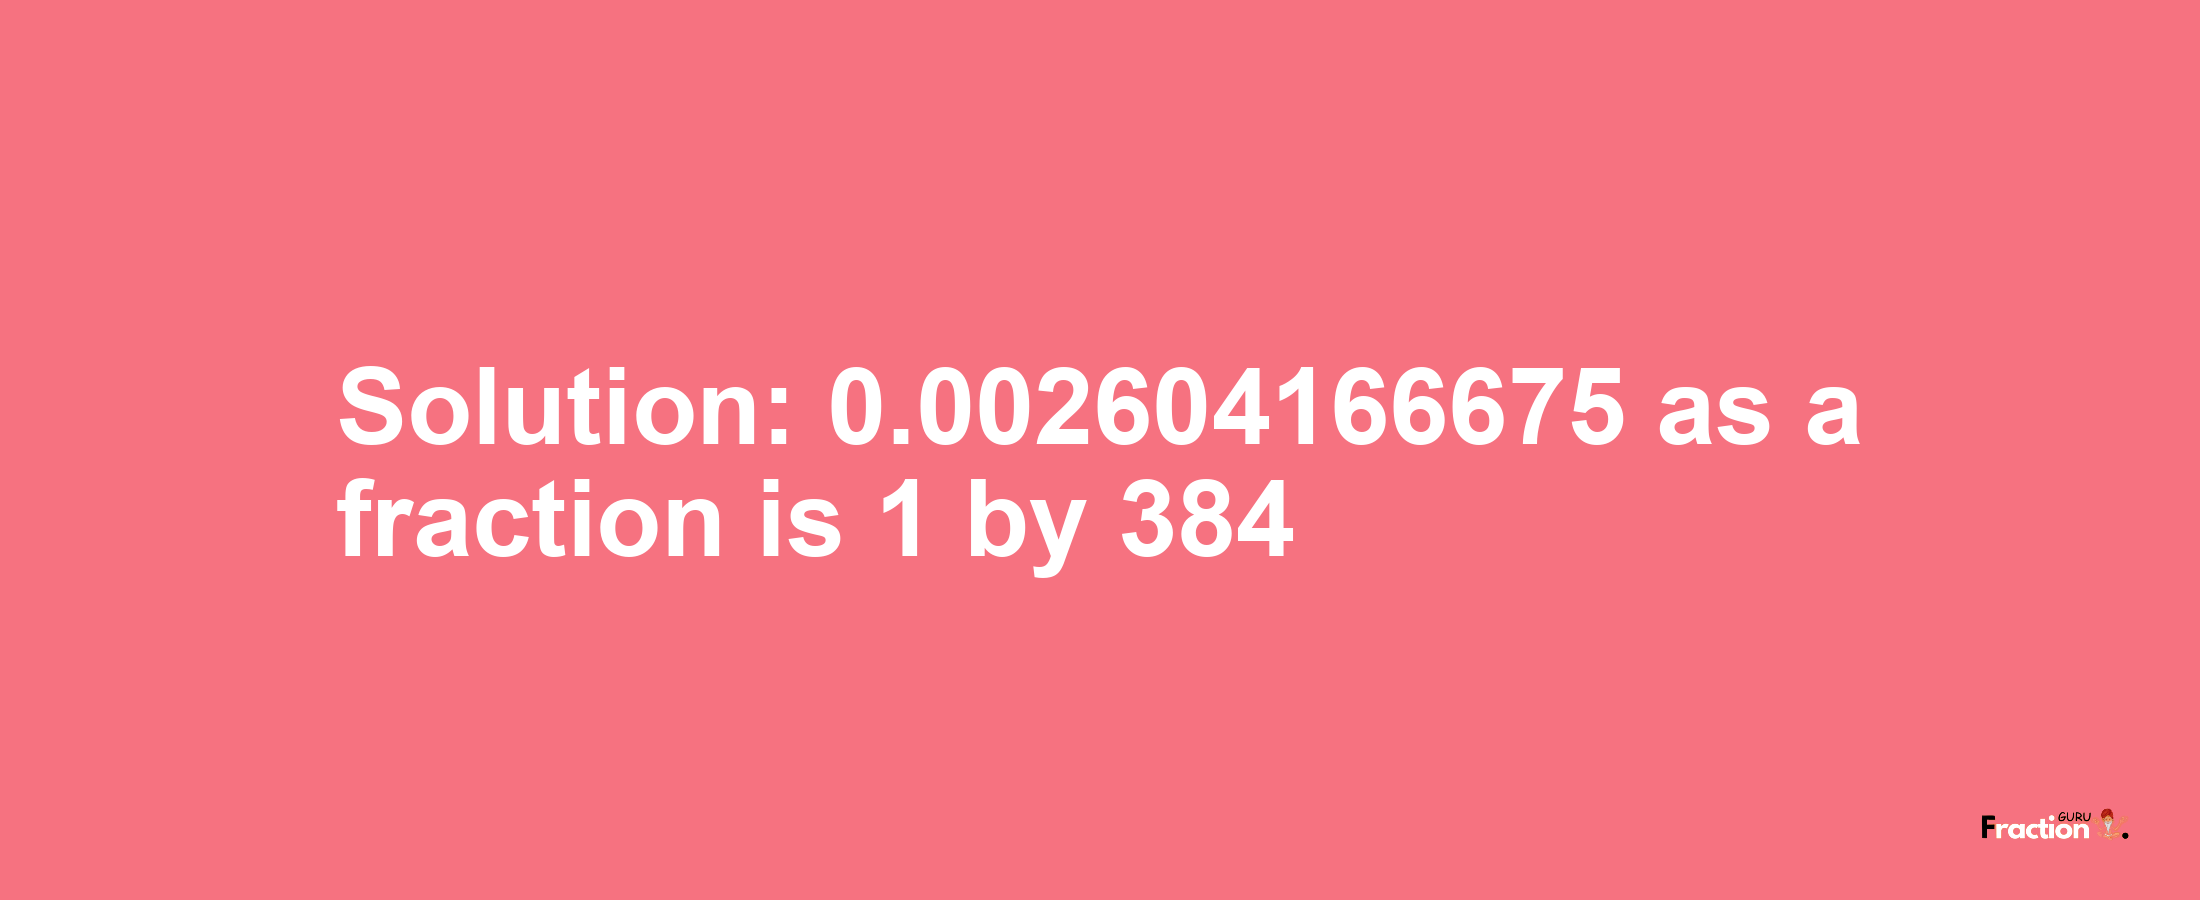 Solution:0.002604166675 as a fraction is 1/384